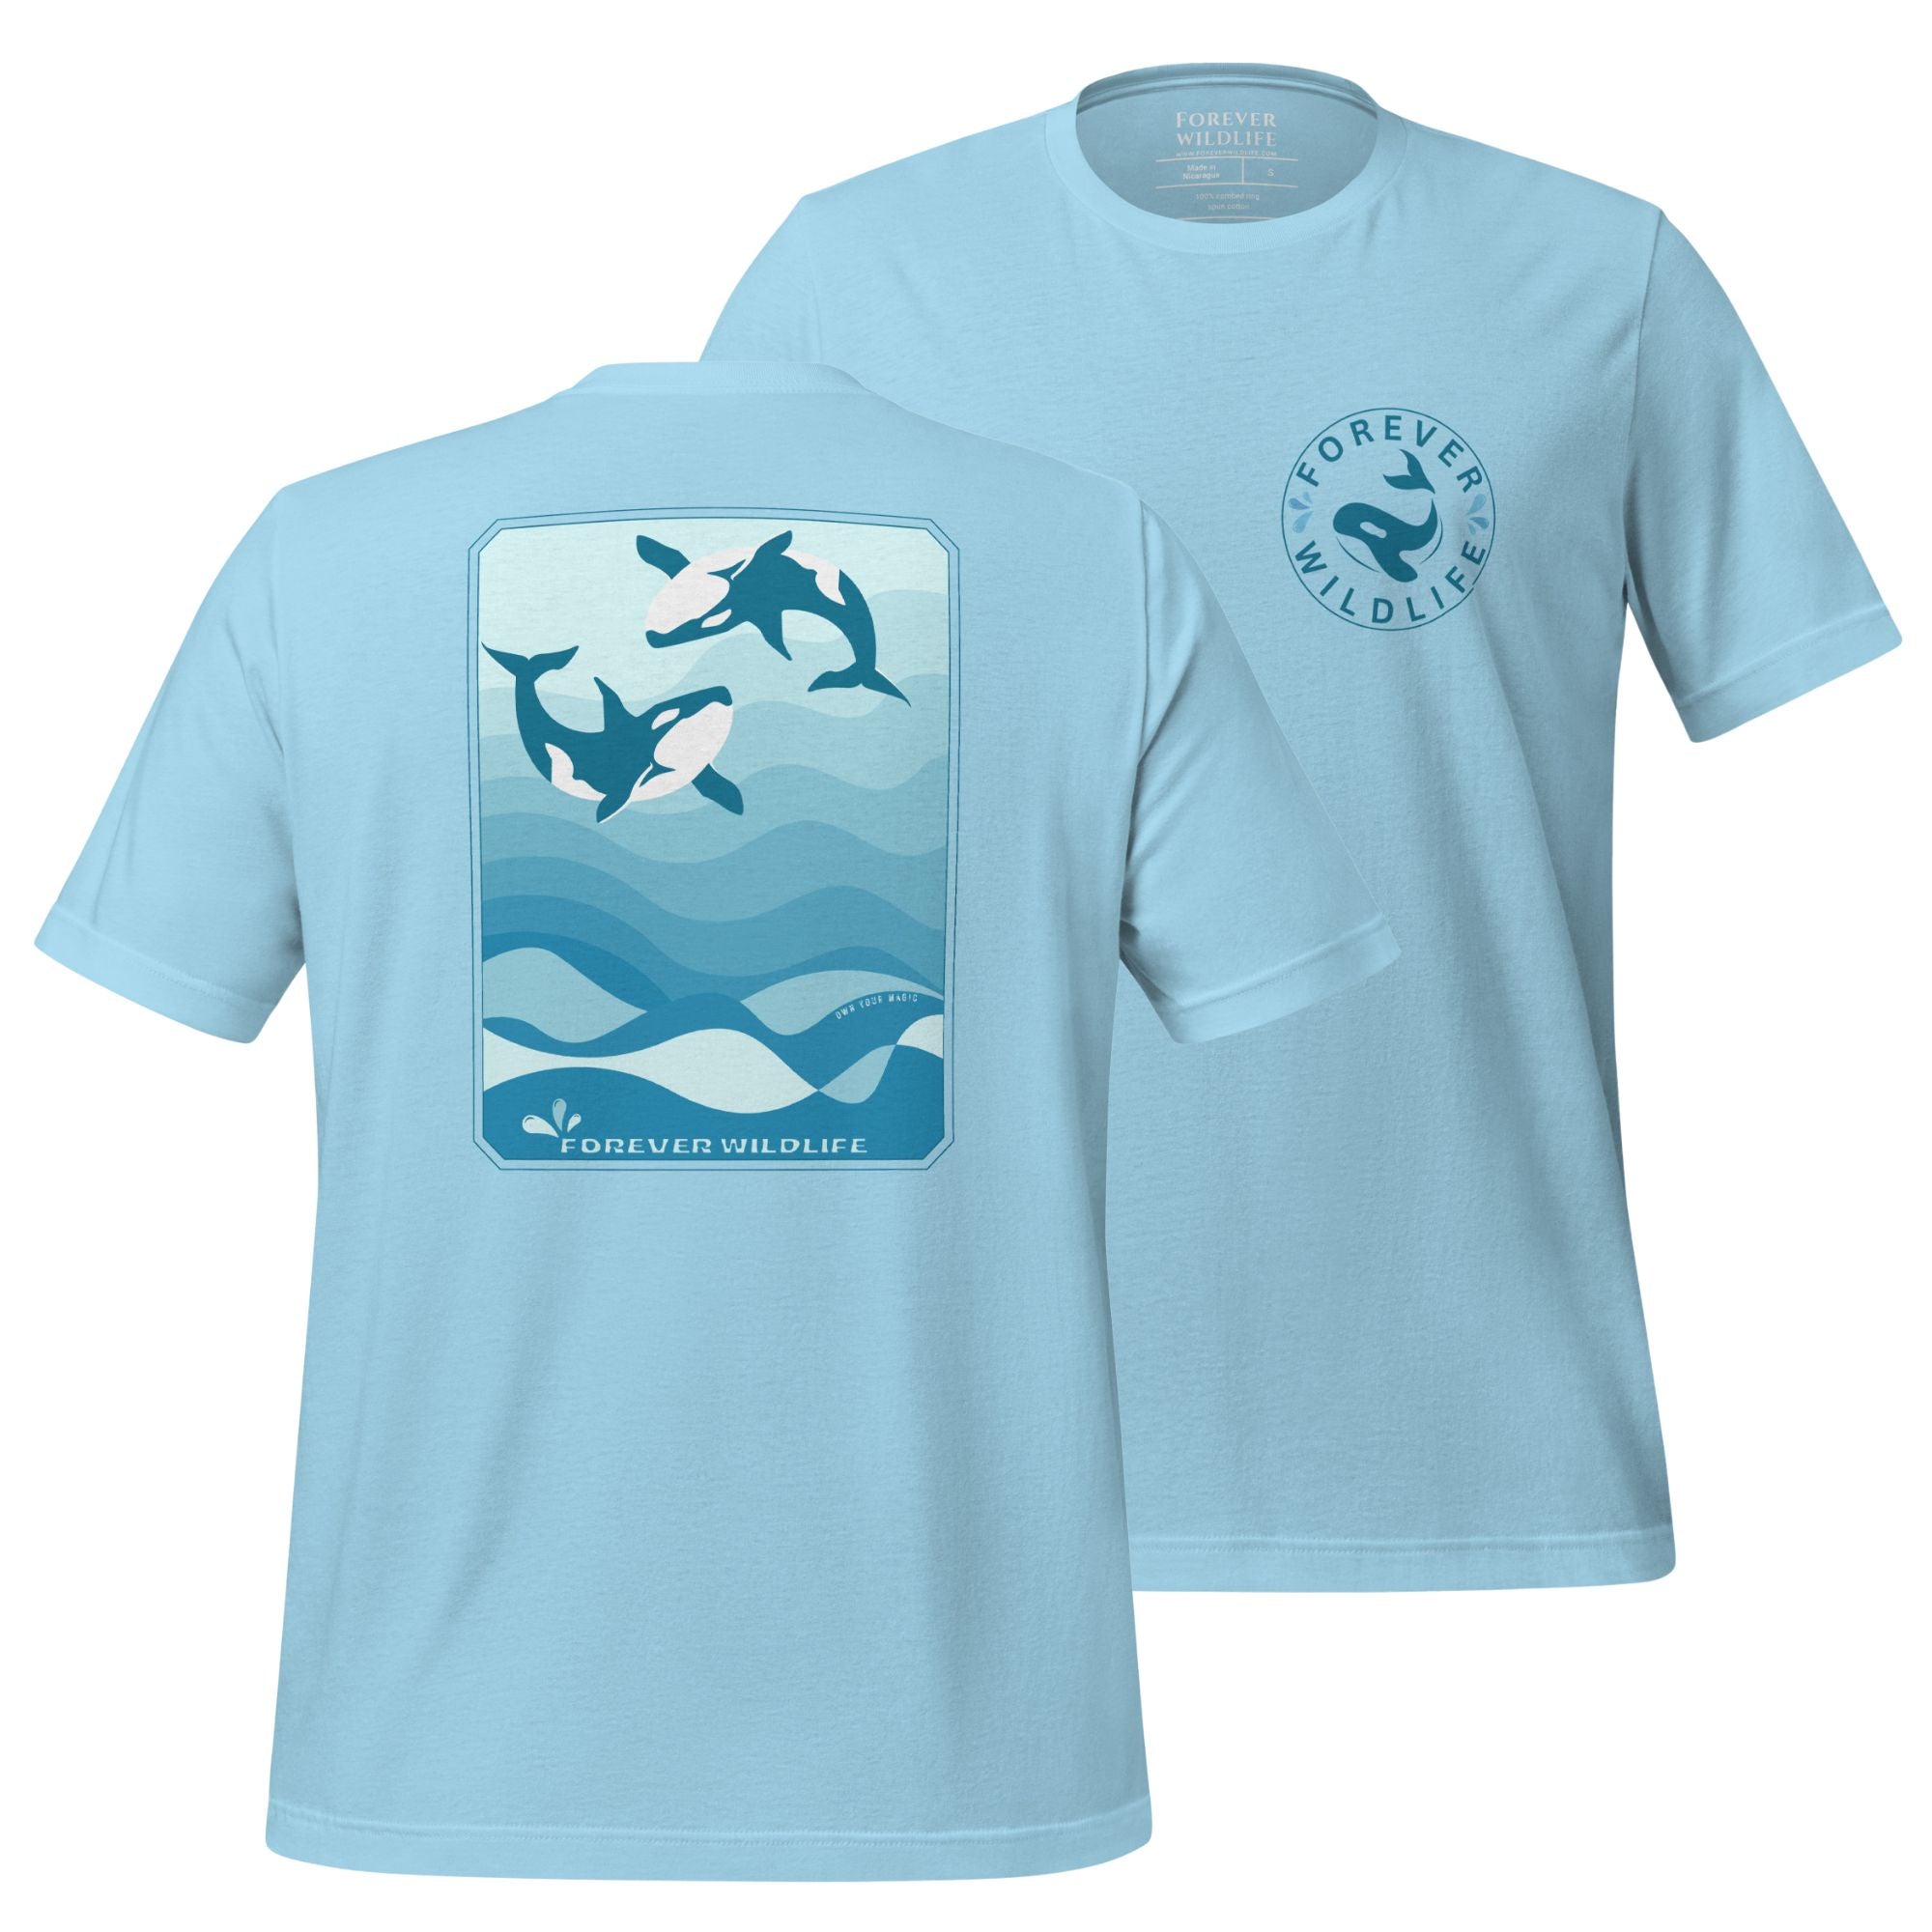 Orca Shirt, beautiful Ocean Blue Orca T-Shirt with Killer Whales on the shirt by Forever Wildlife selling Wildlife T Shirts.